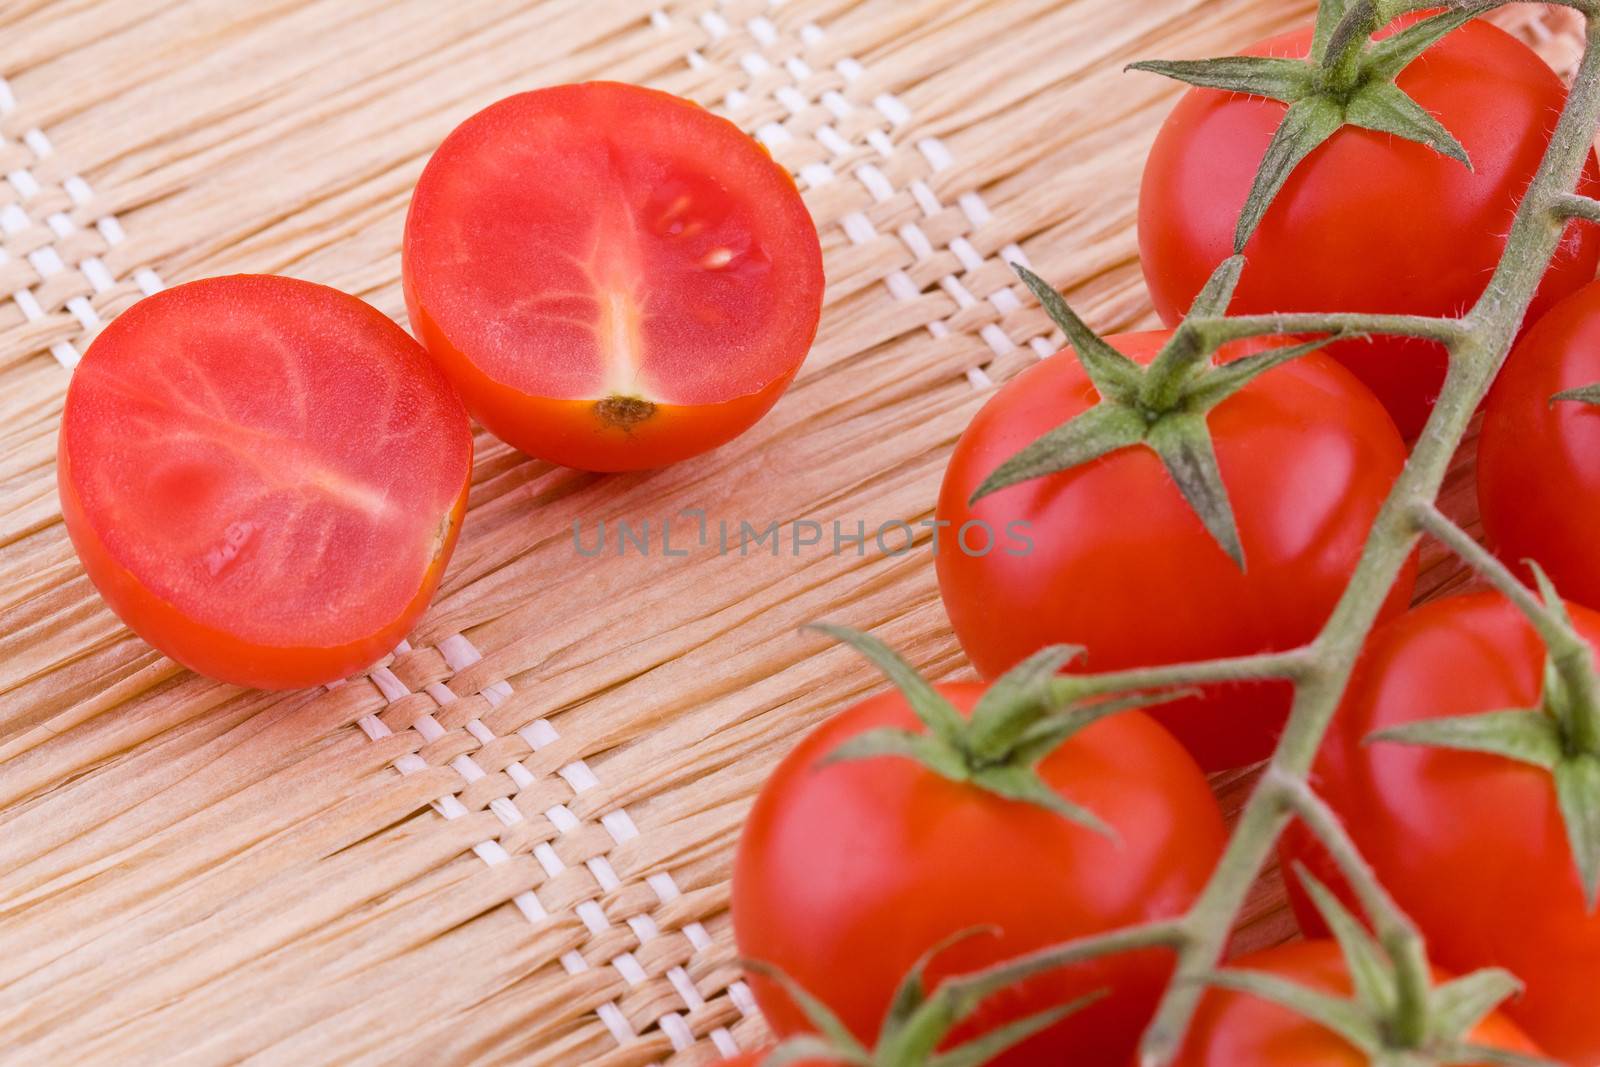 Red small tomatoes by Gbuglok